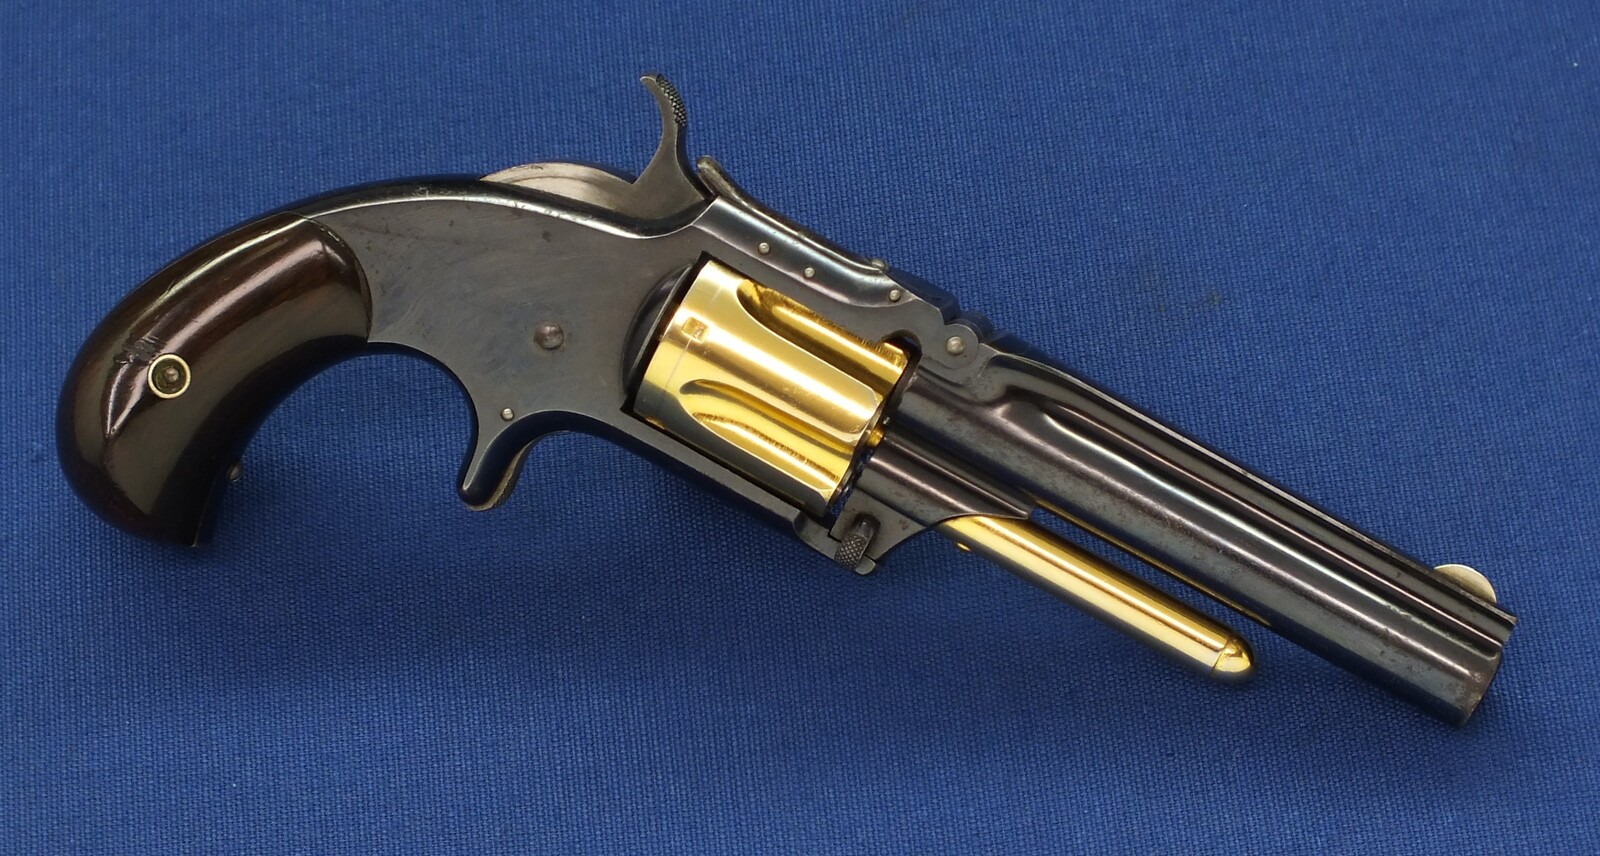 A fine antique 19th century American Smith & Wesson Revolver, Model No. 1-1/2 Second Issue. .32 Rimfire caliber, 5 shot fluted gilded cylinder. 3 1/2 inch barrel. In mint condition. Price 1.750 euro.